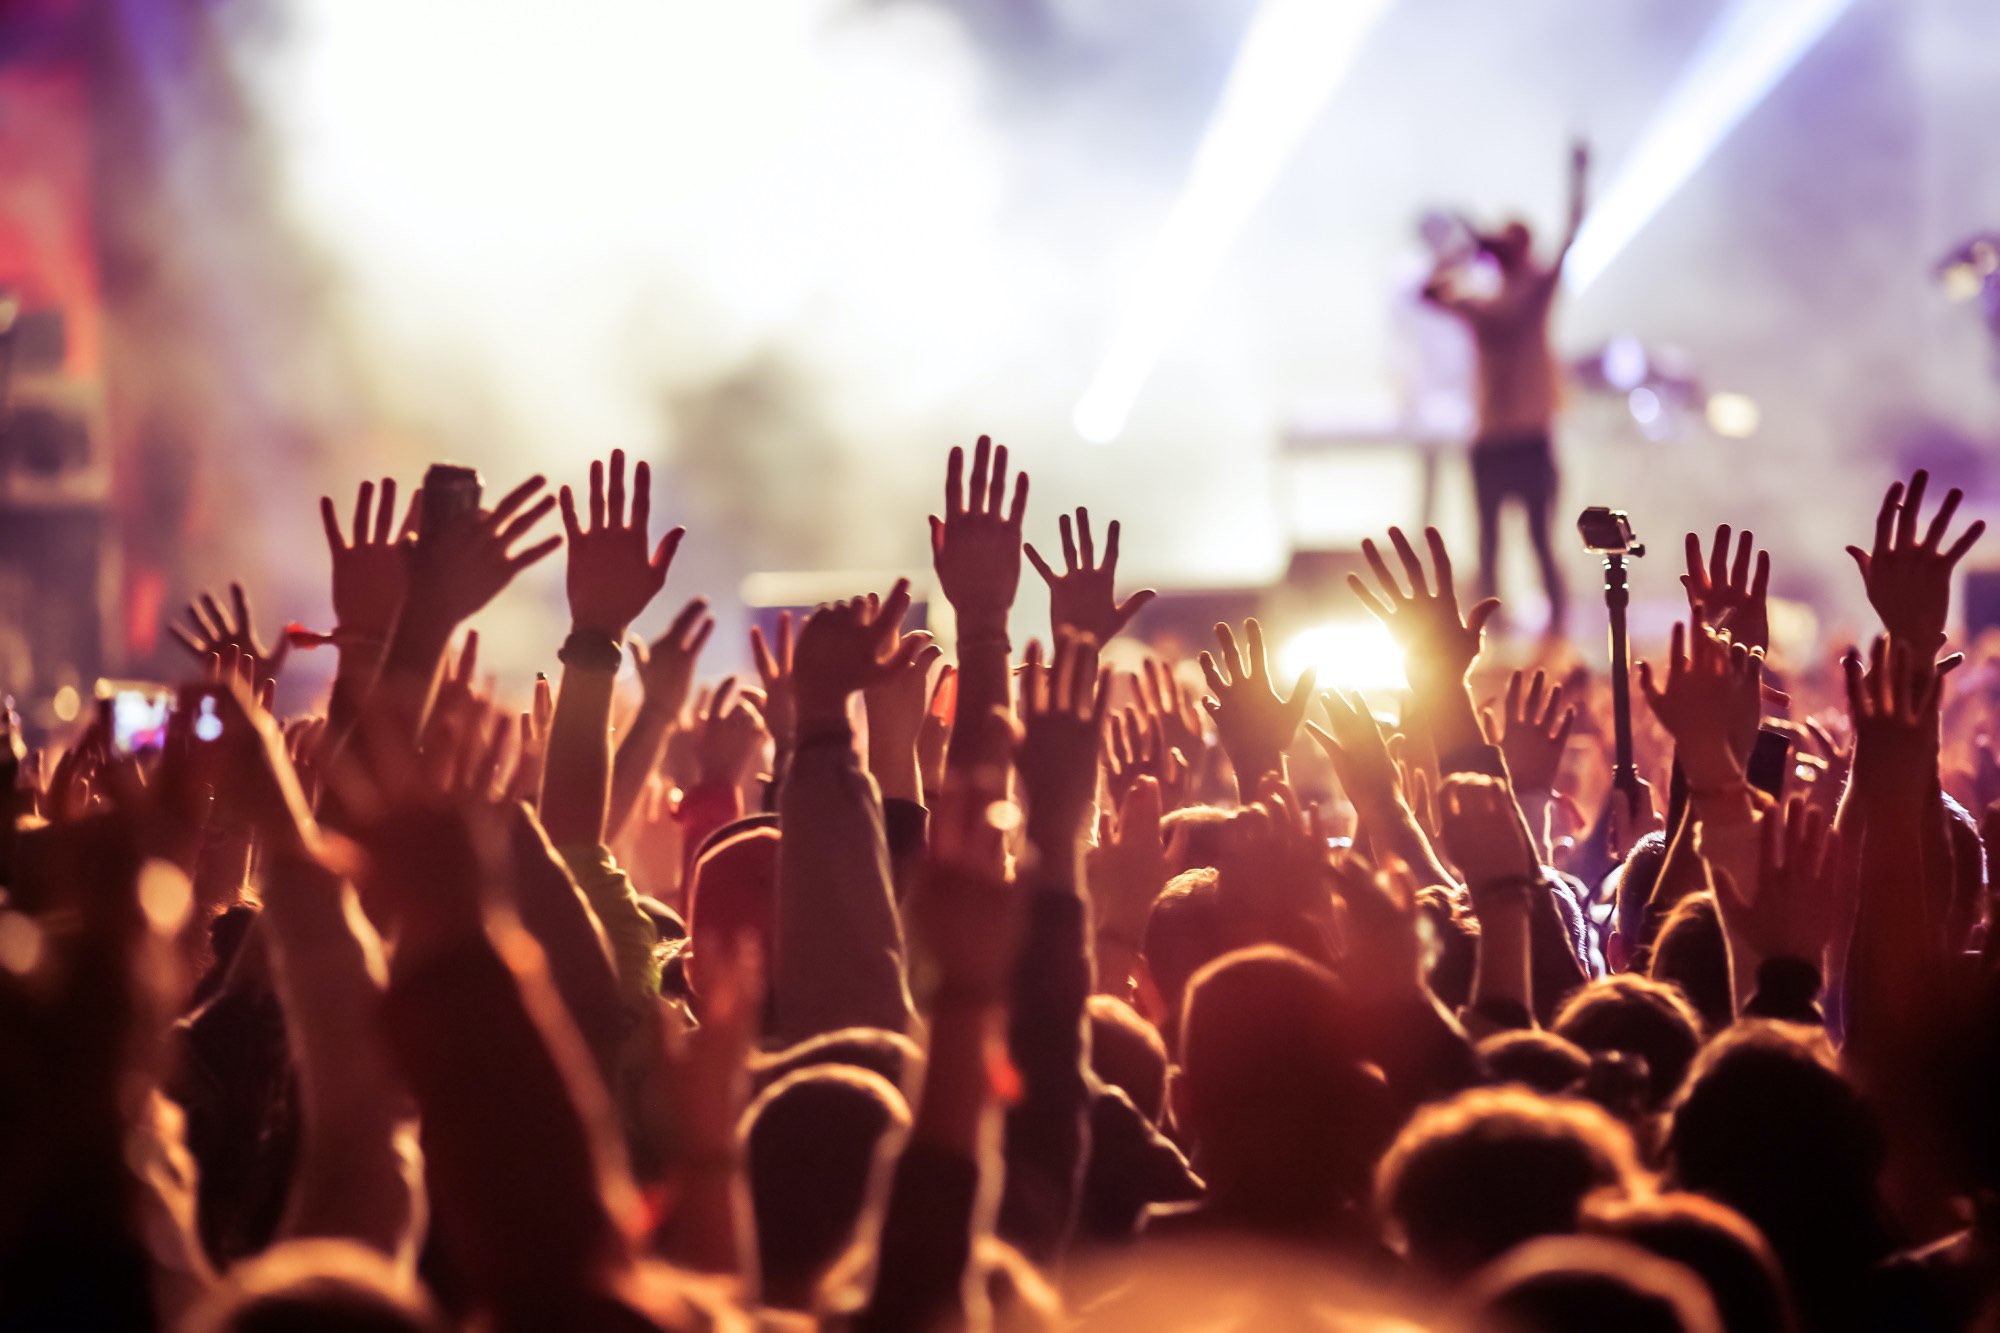 How to Start a Music Festival: 9 Top Tips for Organizing Your Festival